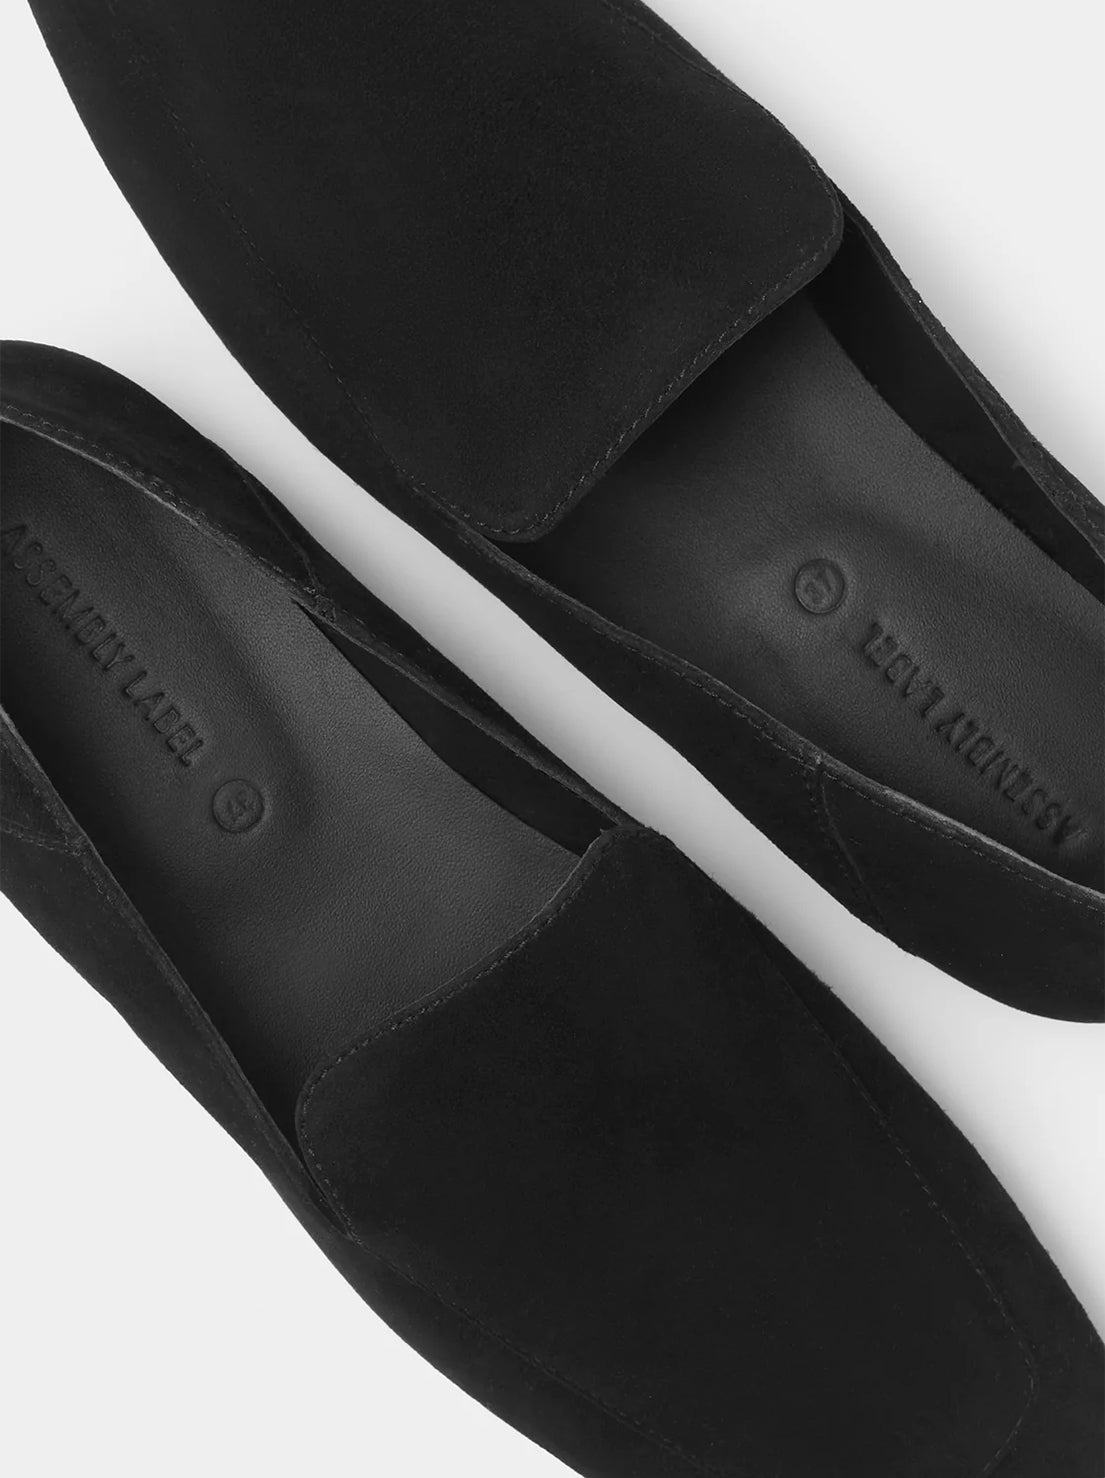 Assembly - Willow Suede Loafer - Black